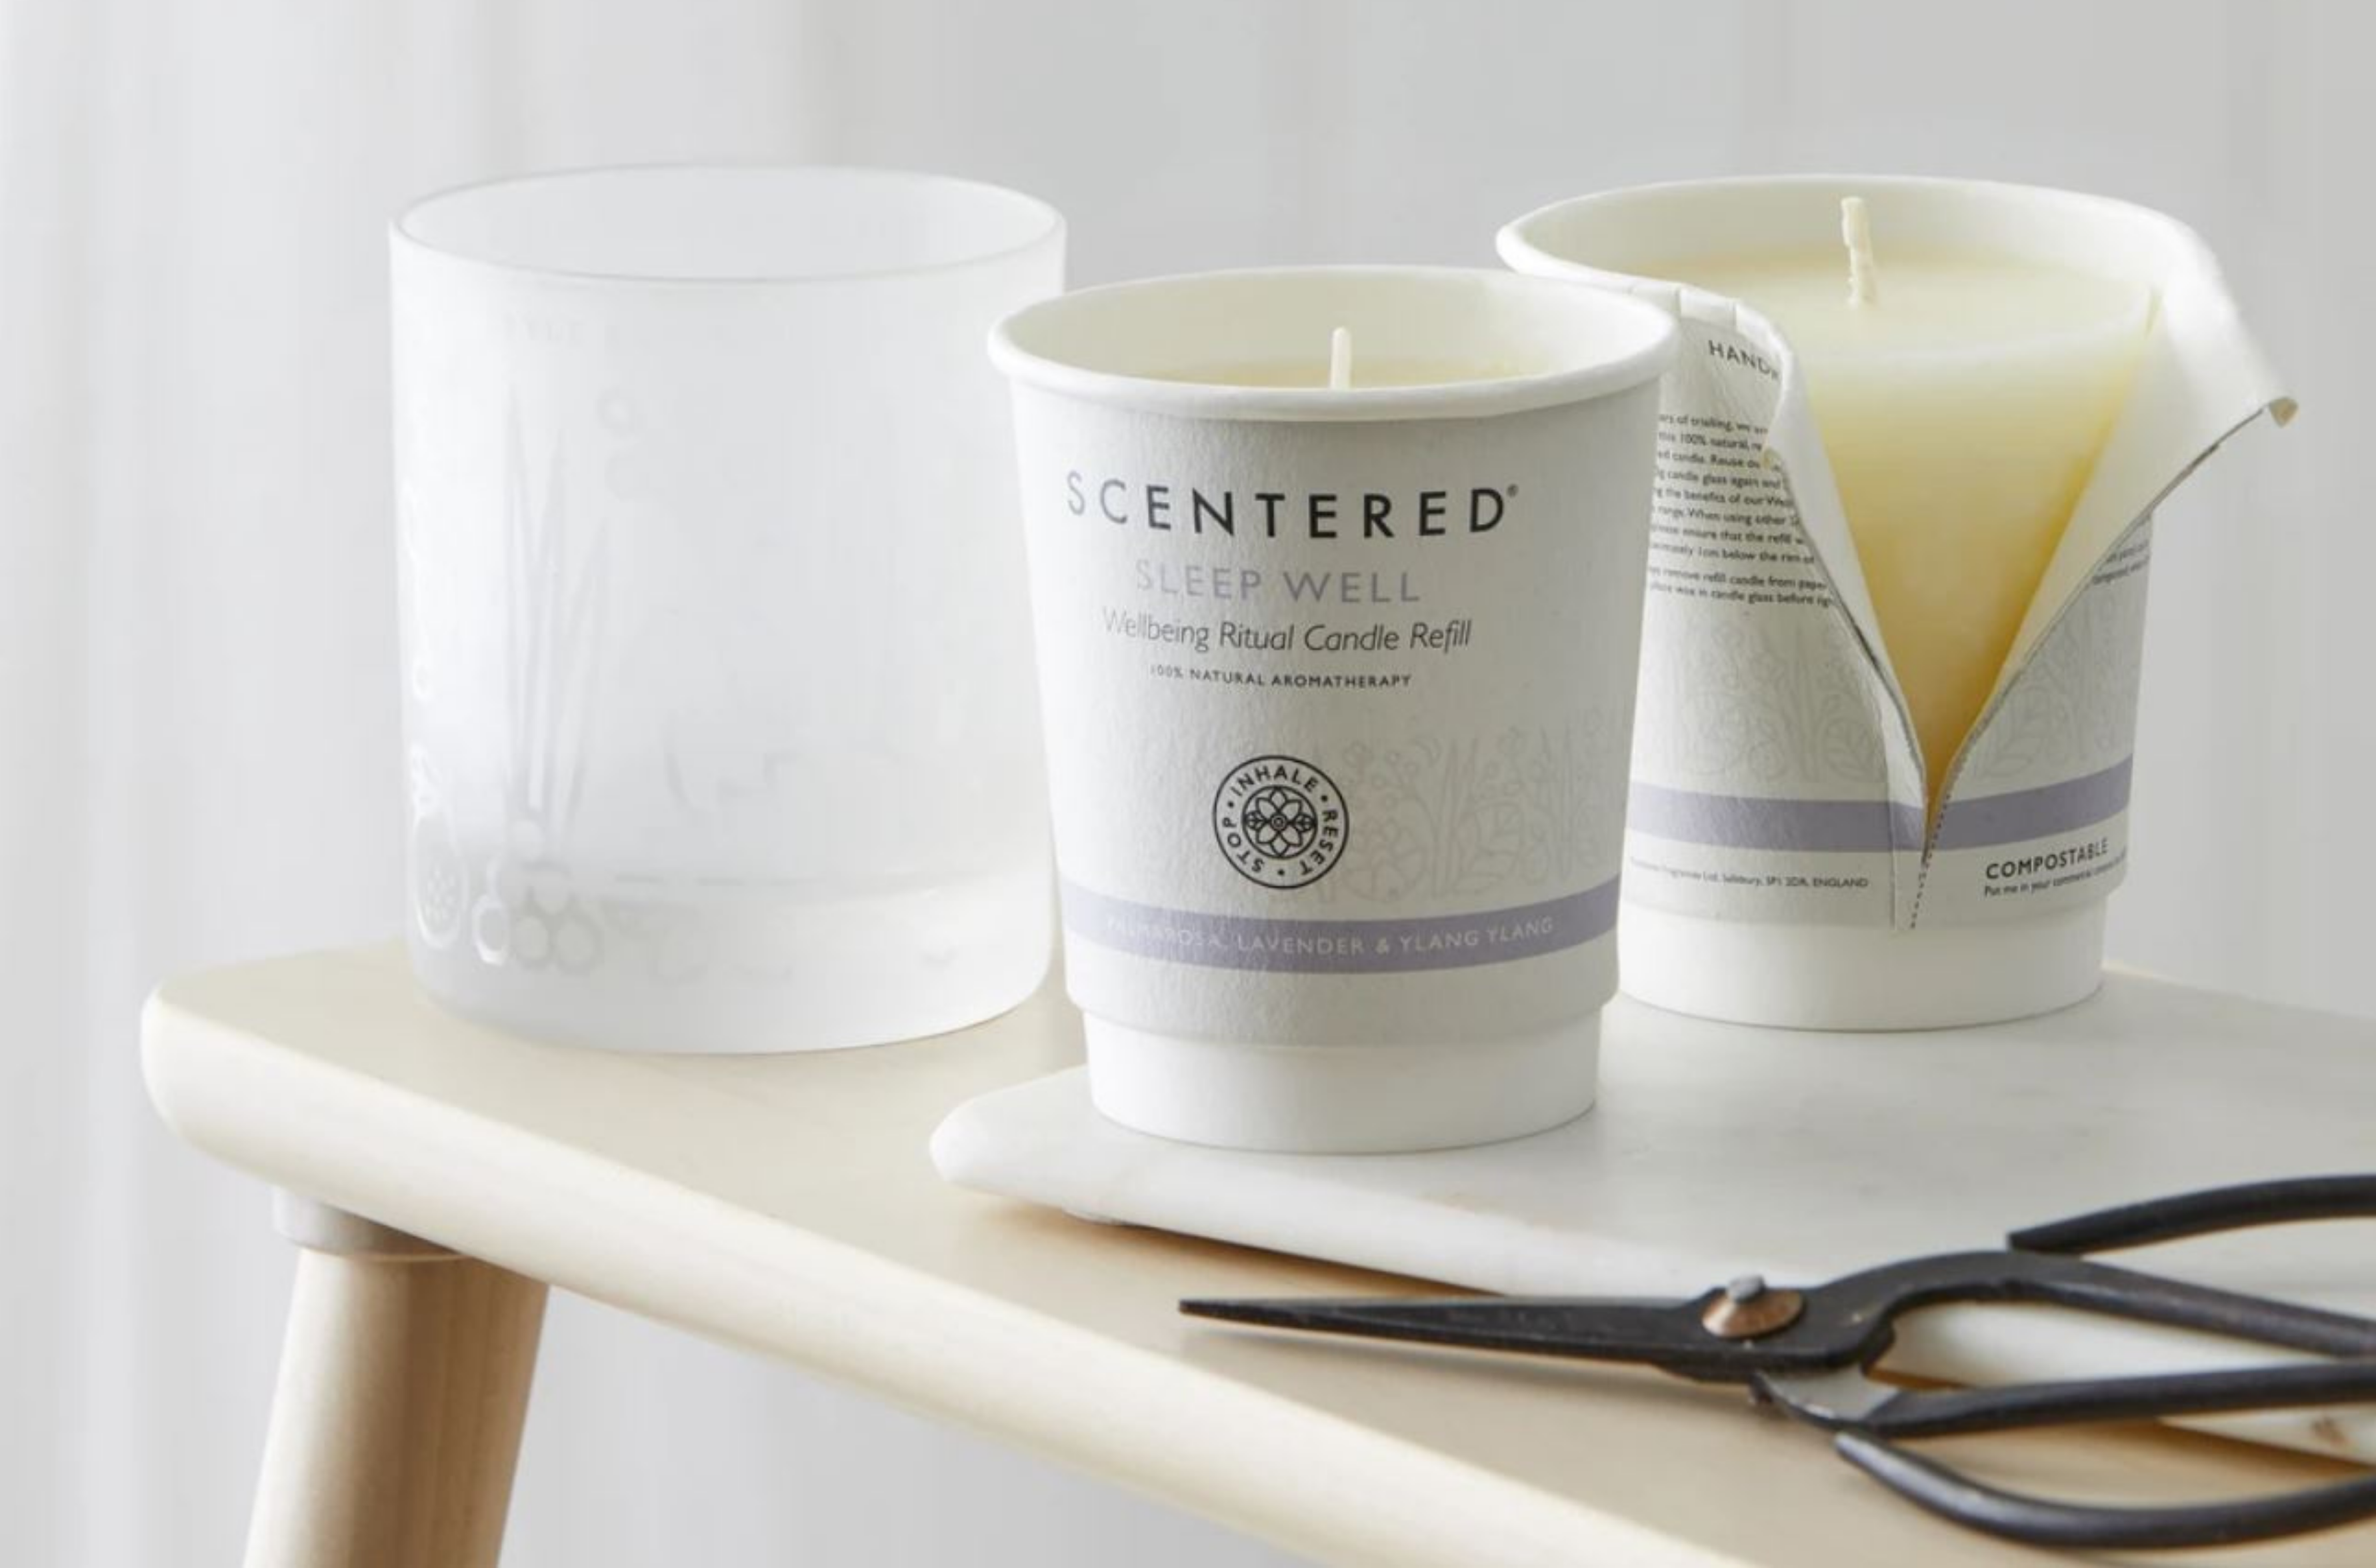 Refillable candles